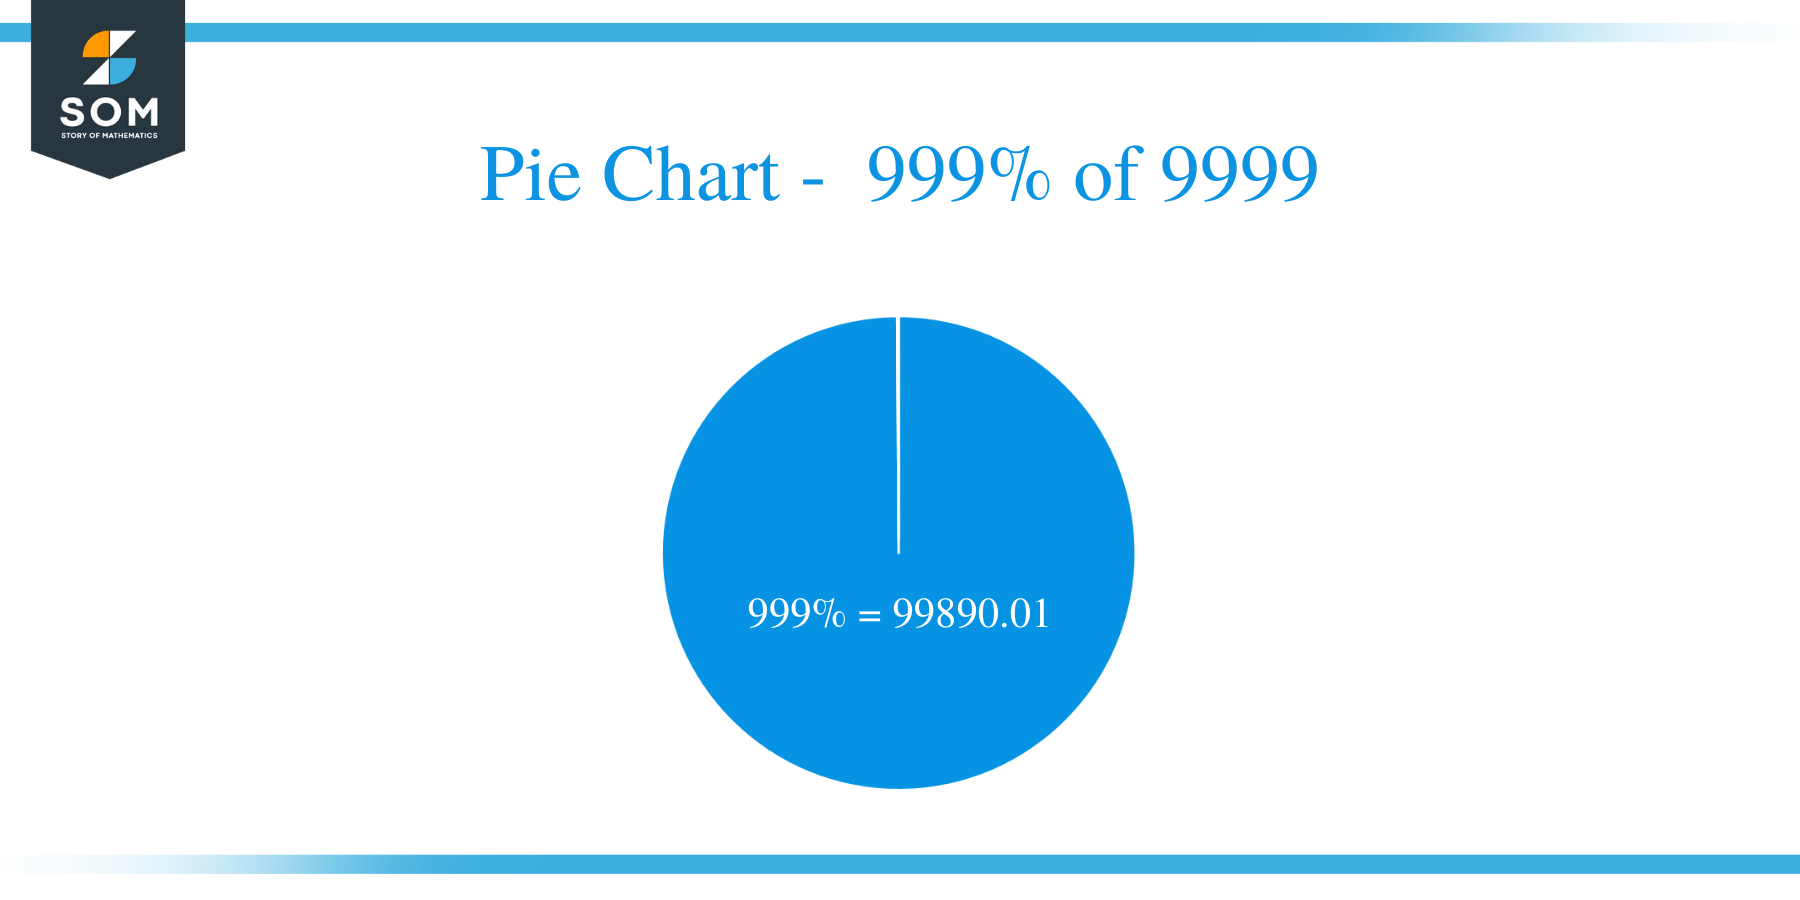 pie chart of 999 percent of 9999